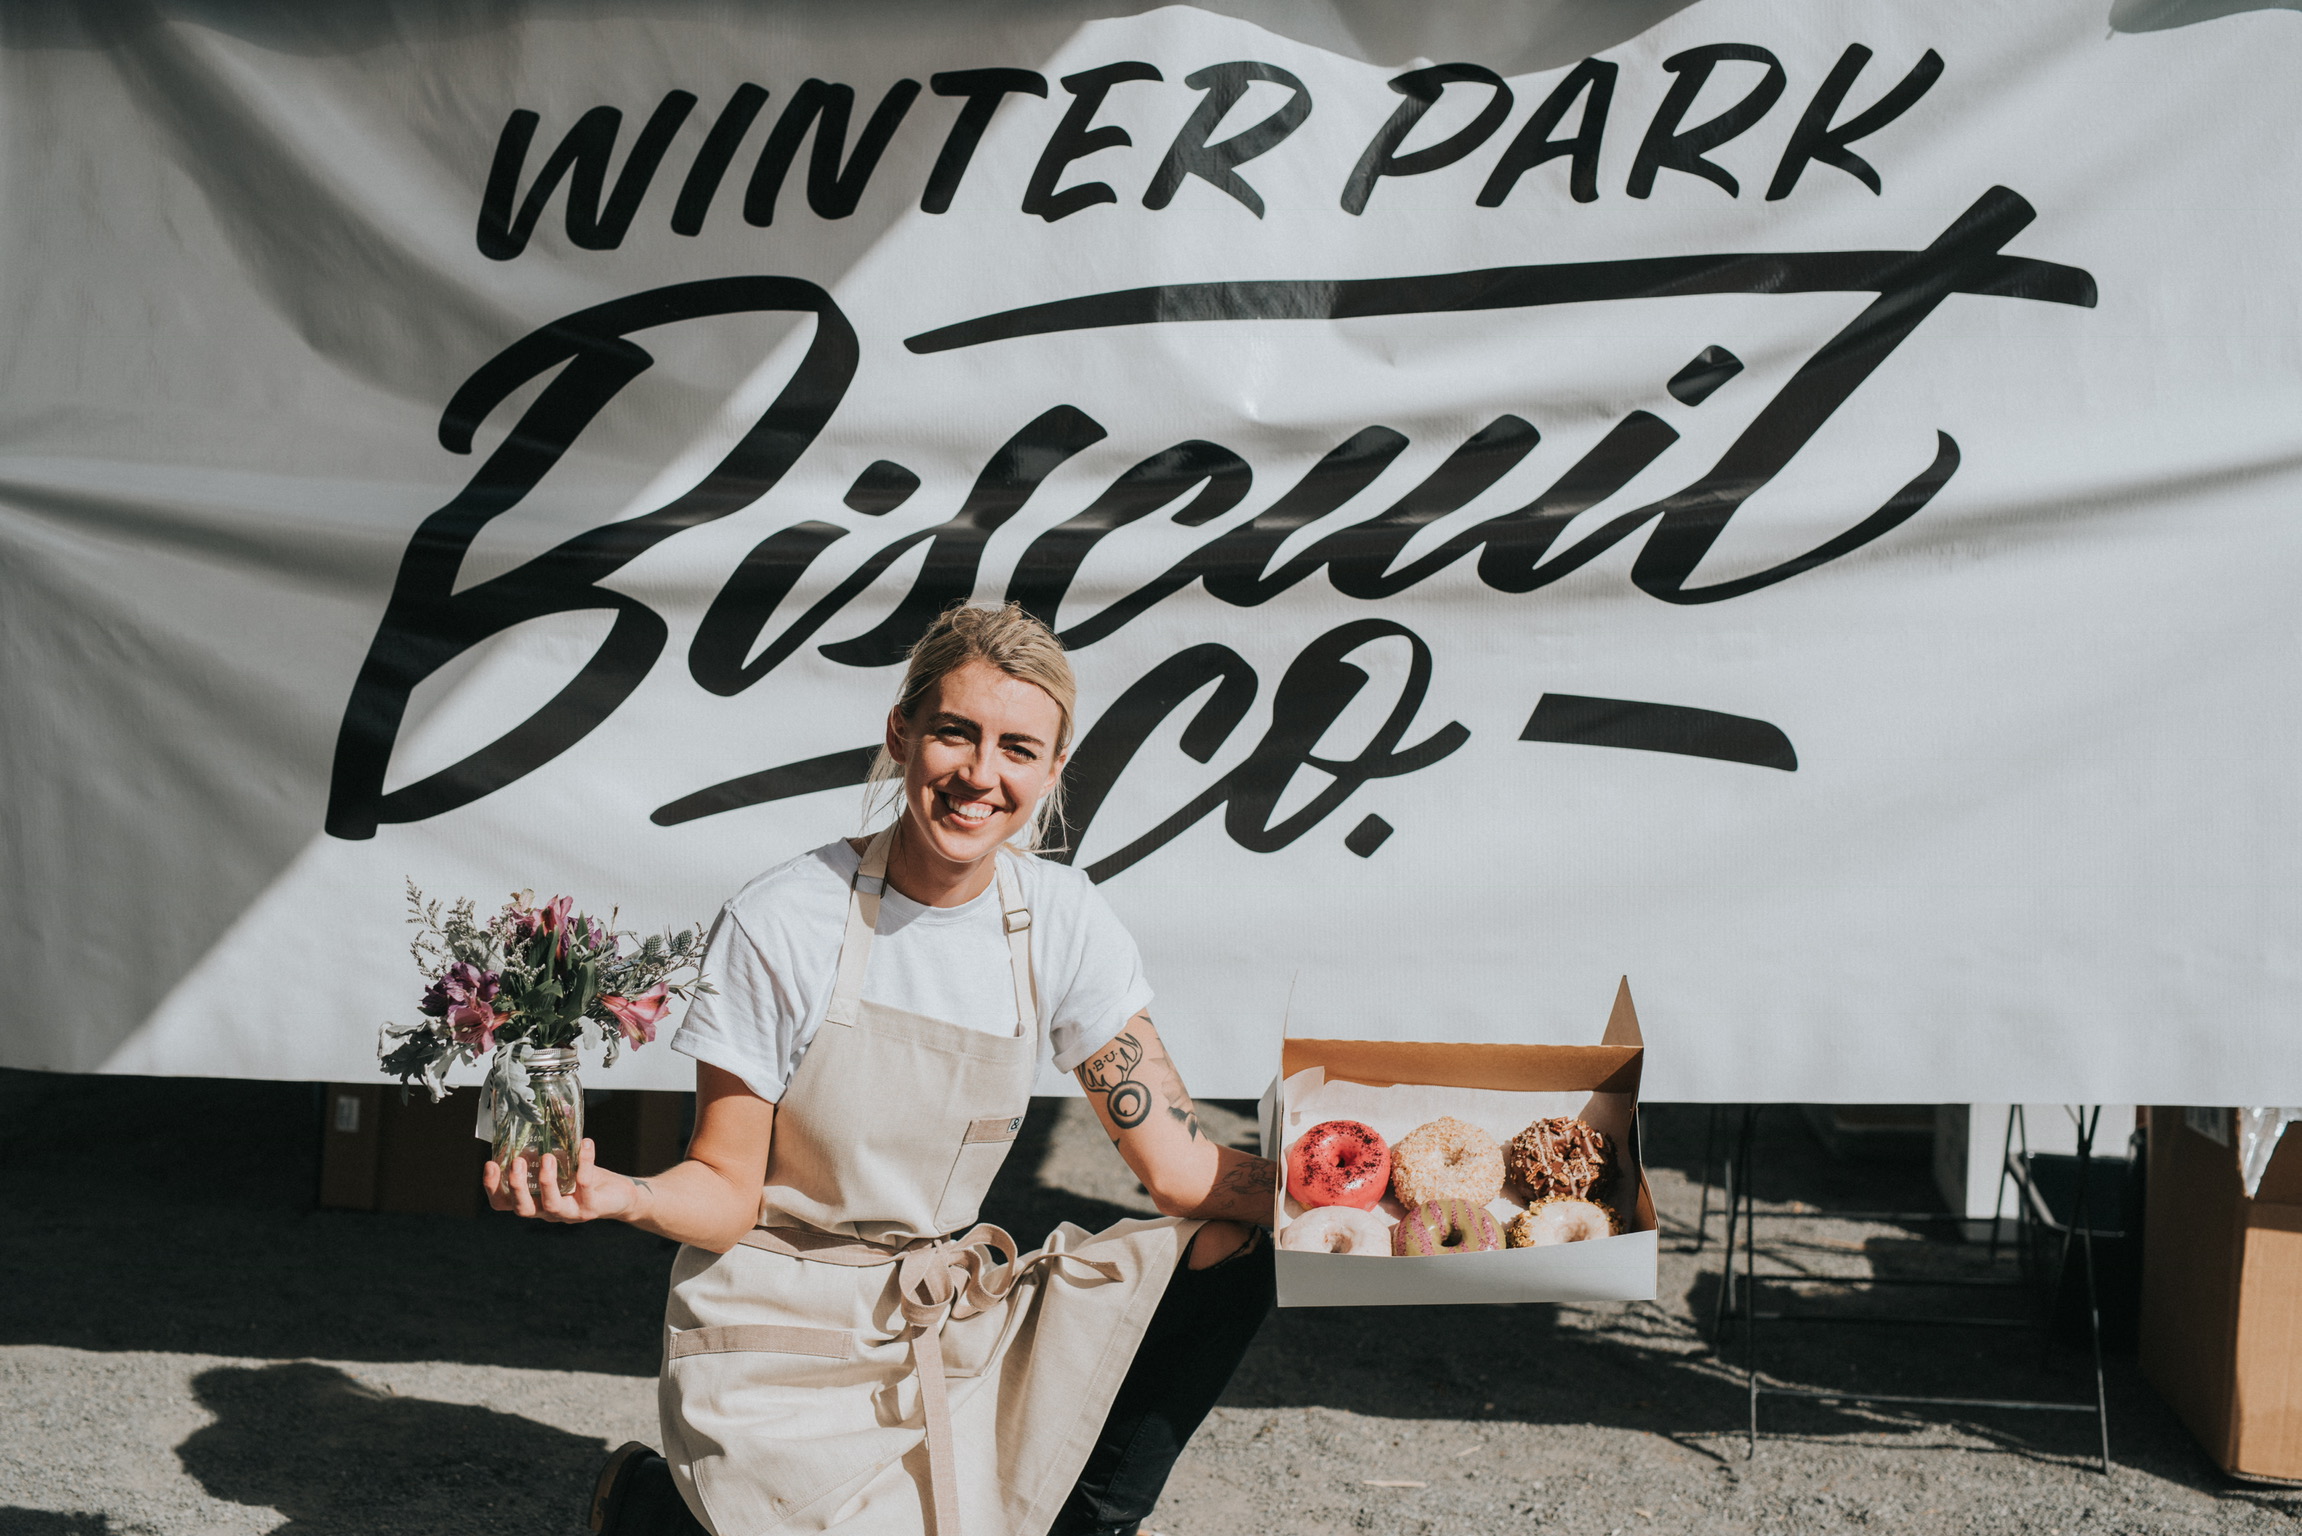 Winter Park Biscuit Co logo hand lettered by Hillery Powers